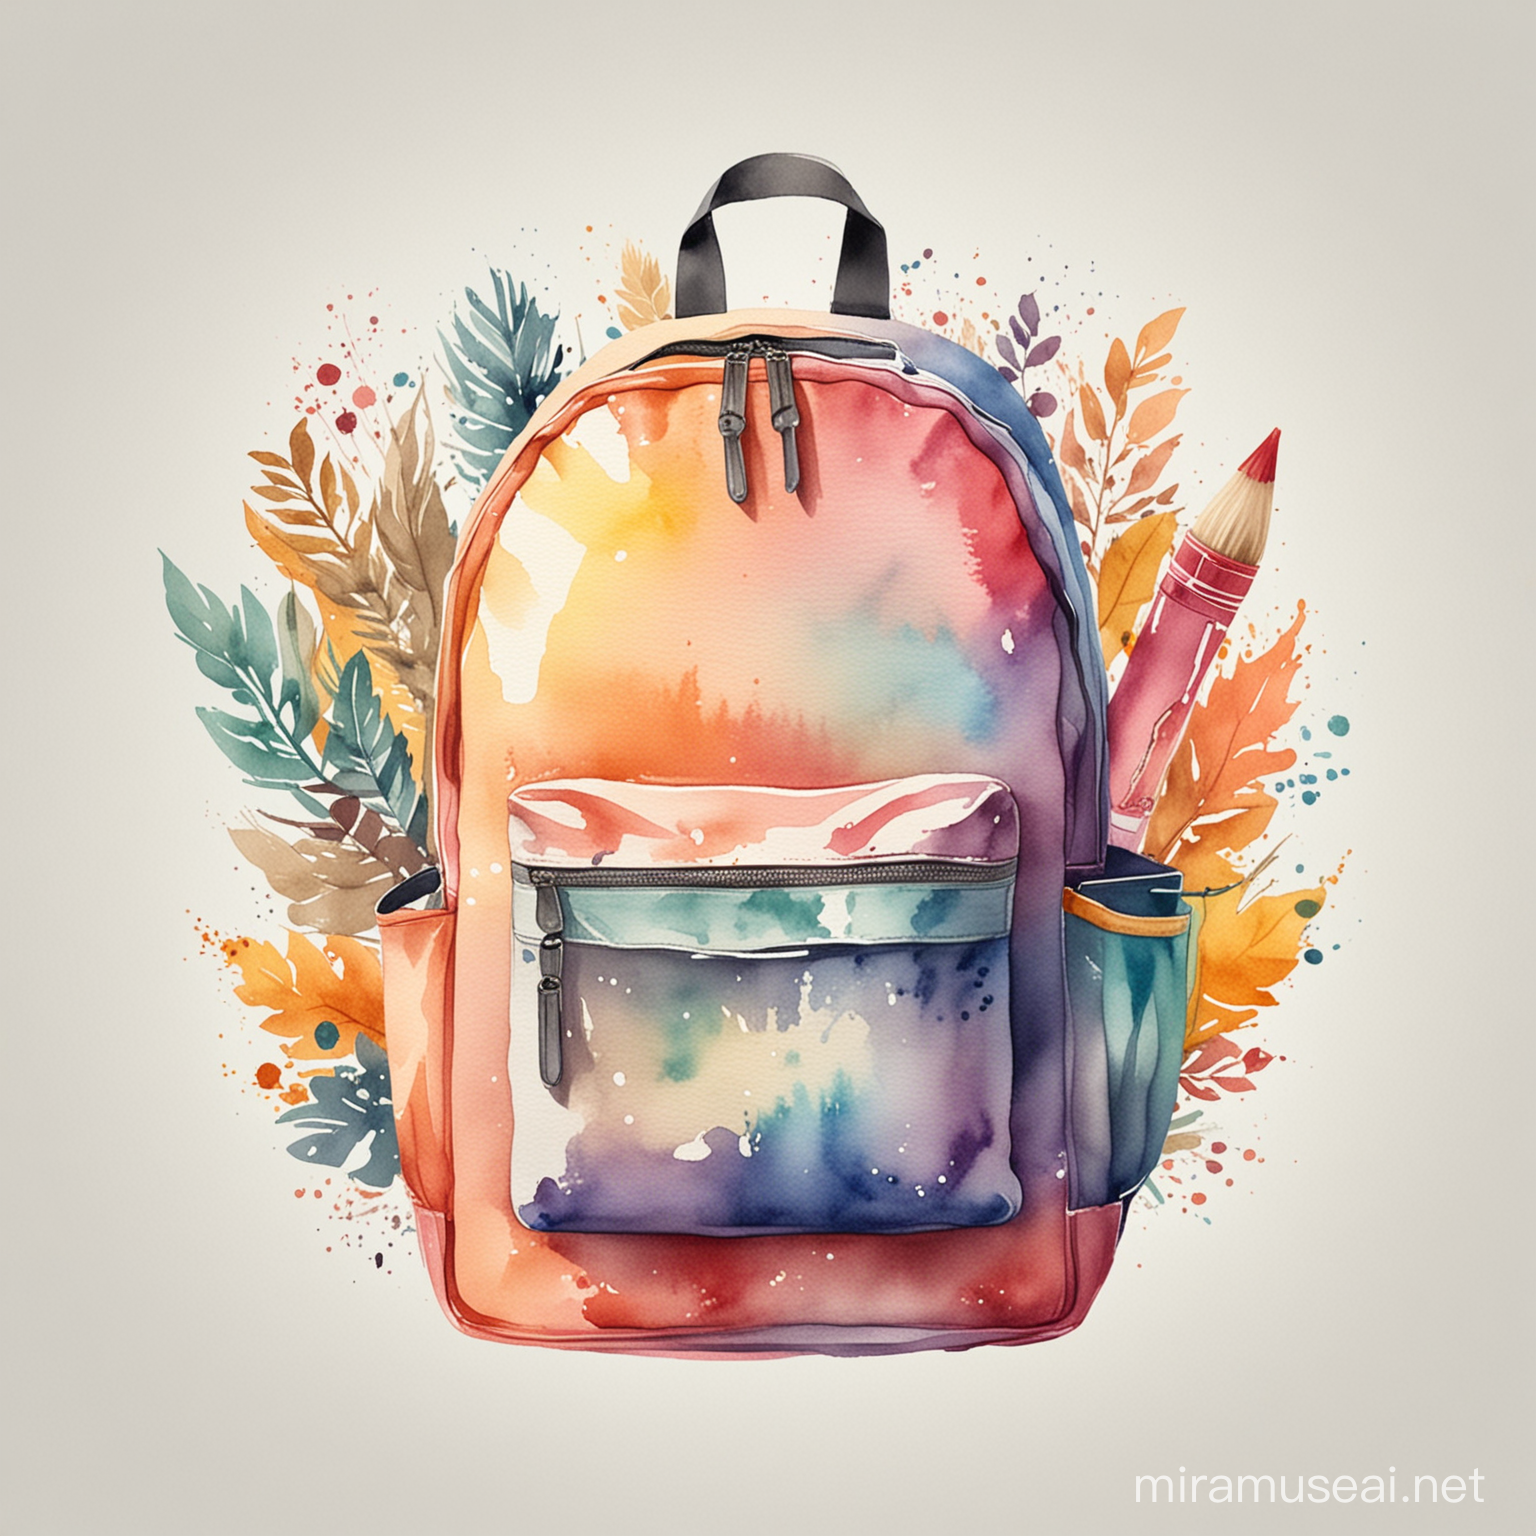 Colorful Watercolor Back to School Illustration